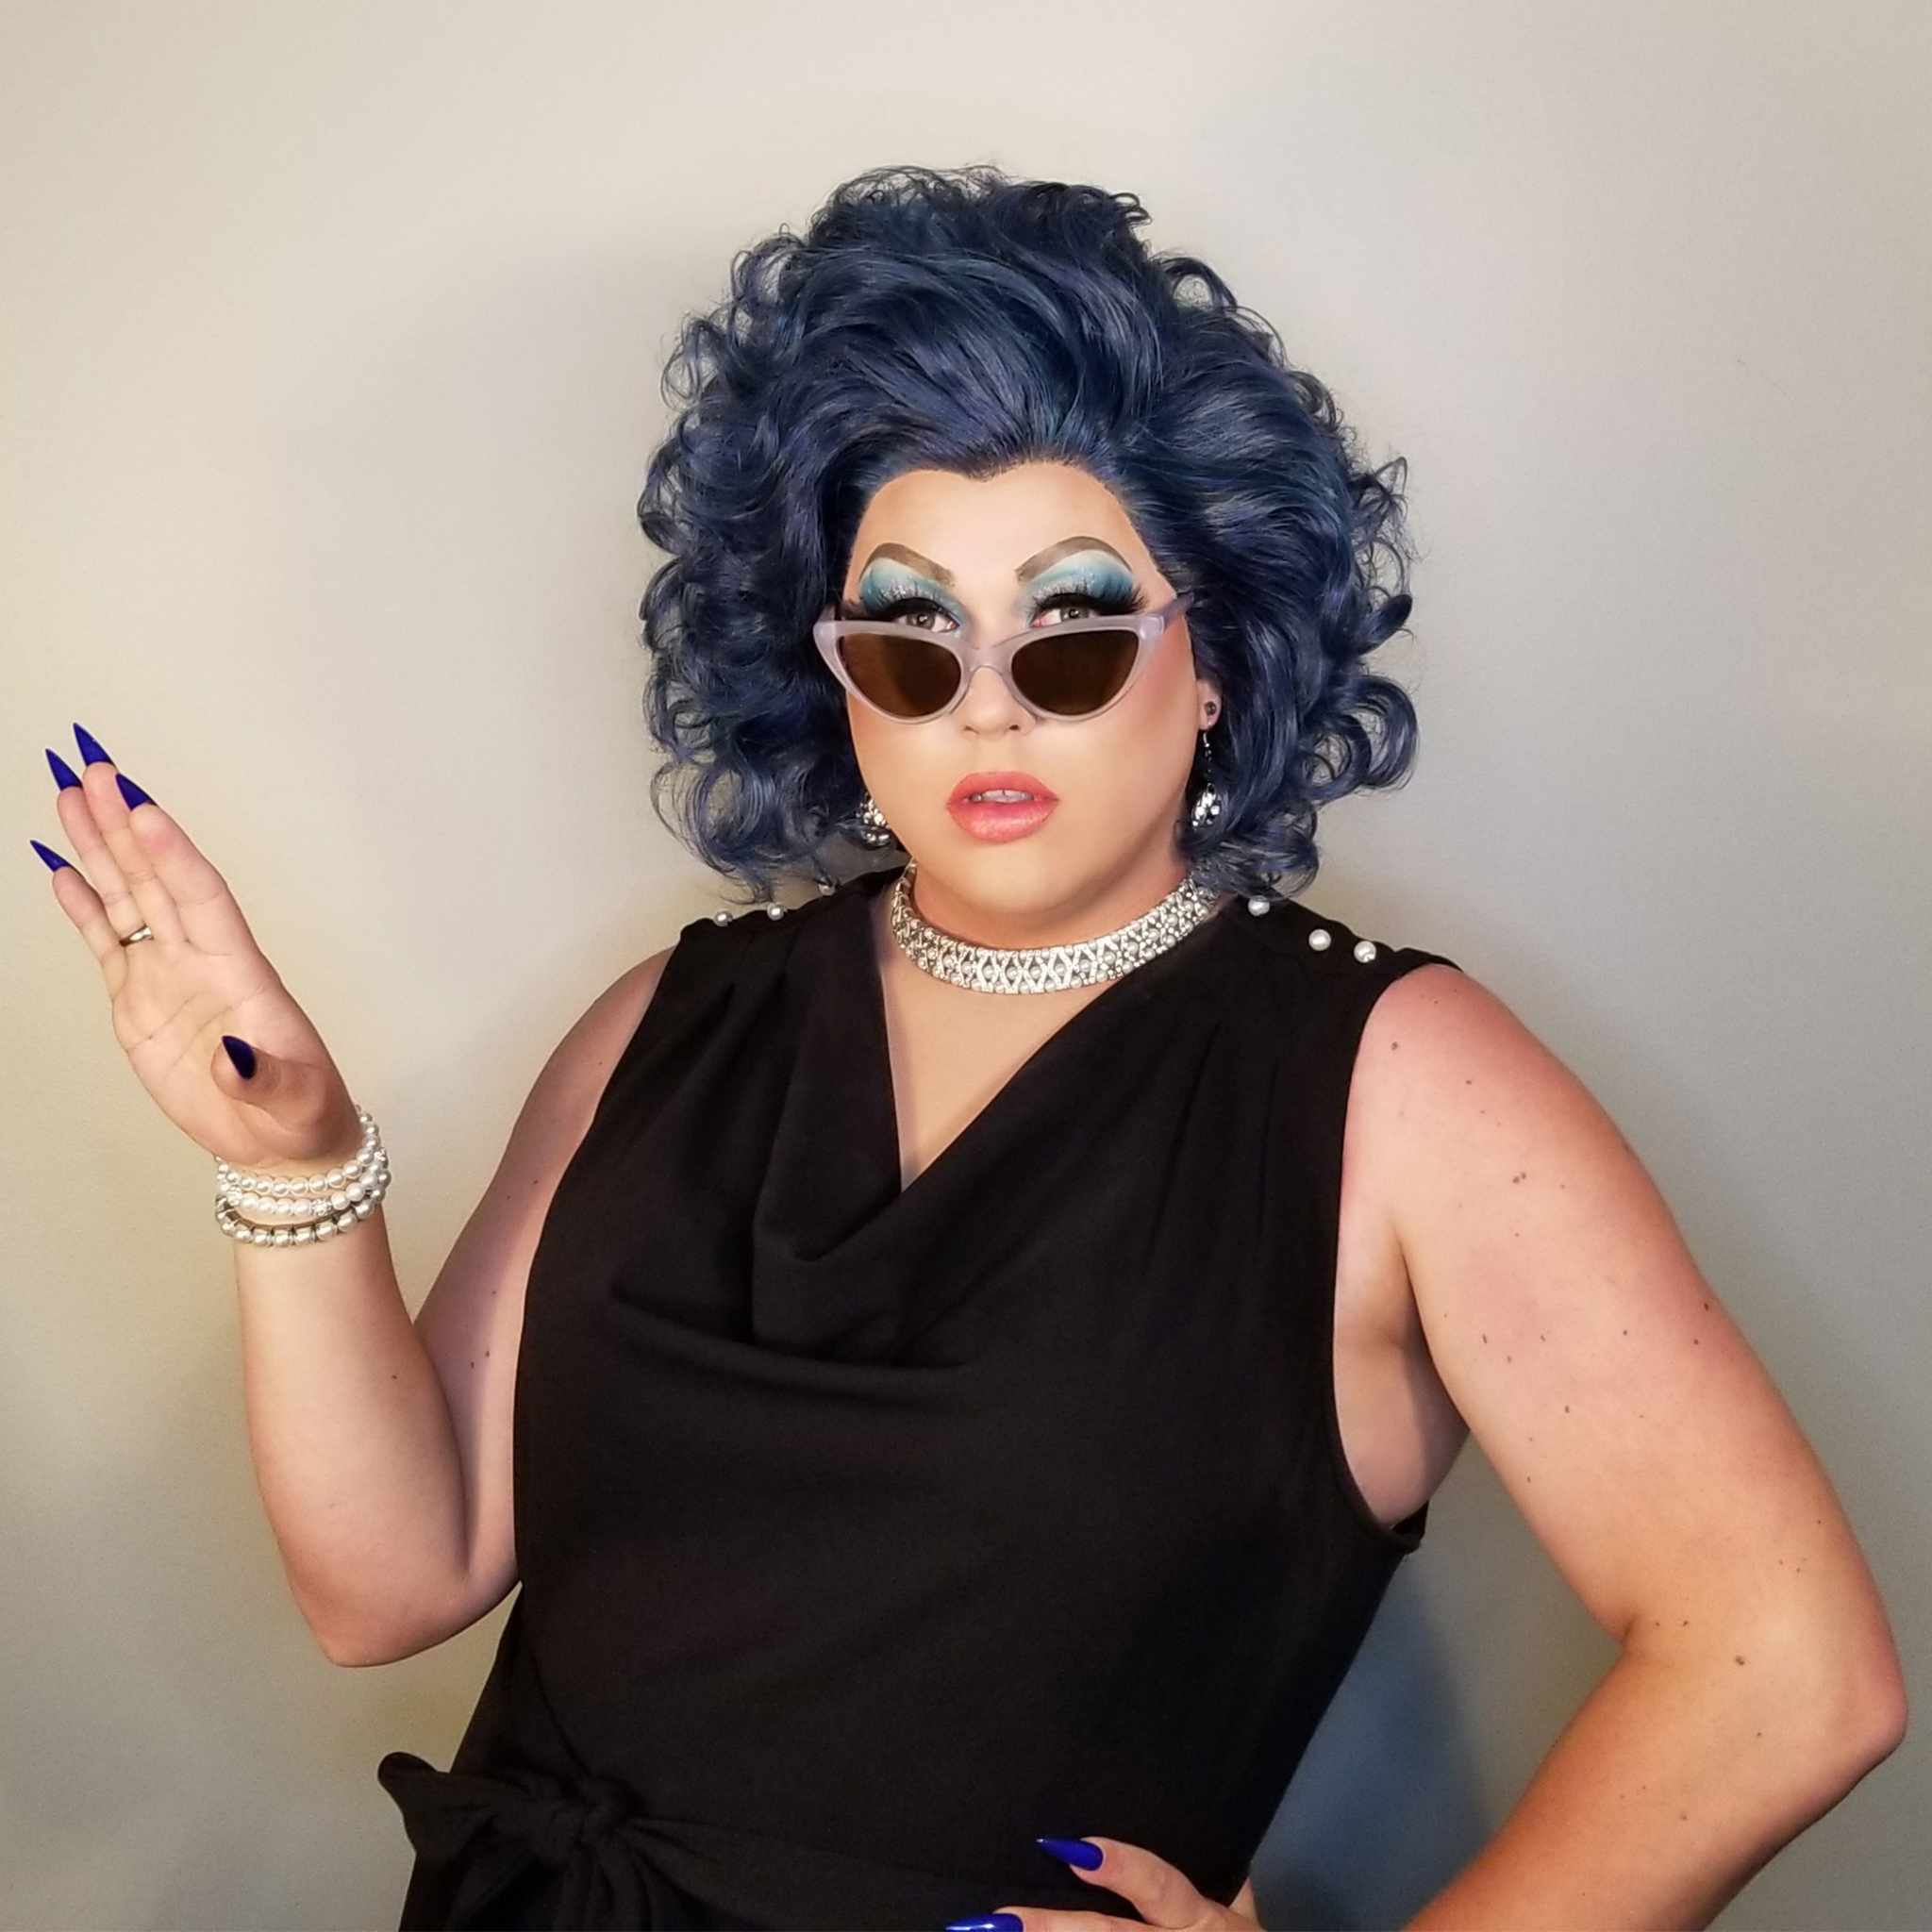 Freida Whales checks in one last time during Pride Month